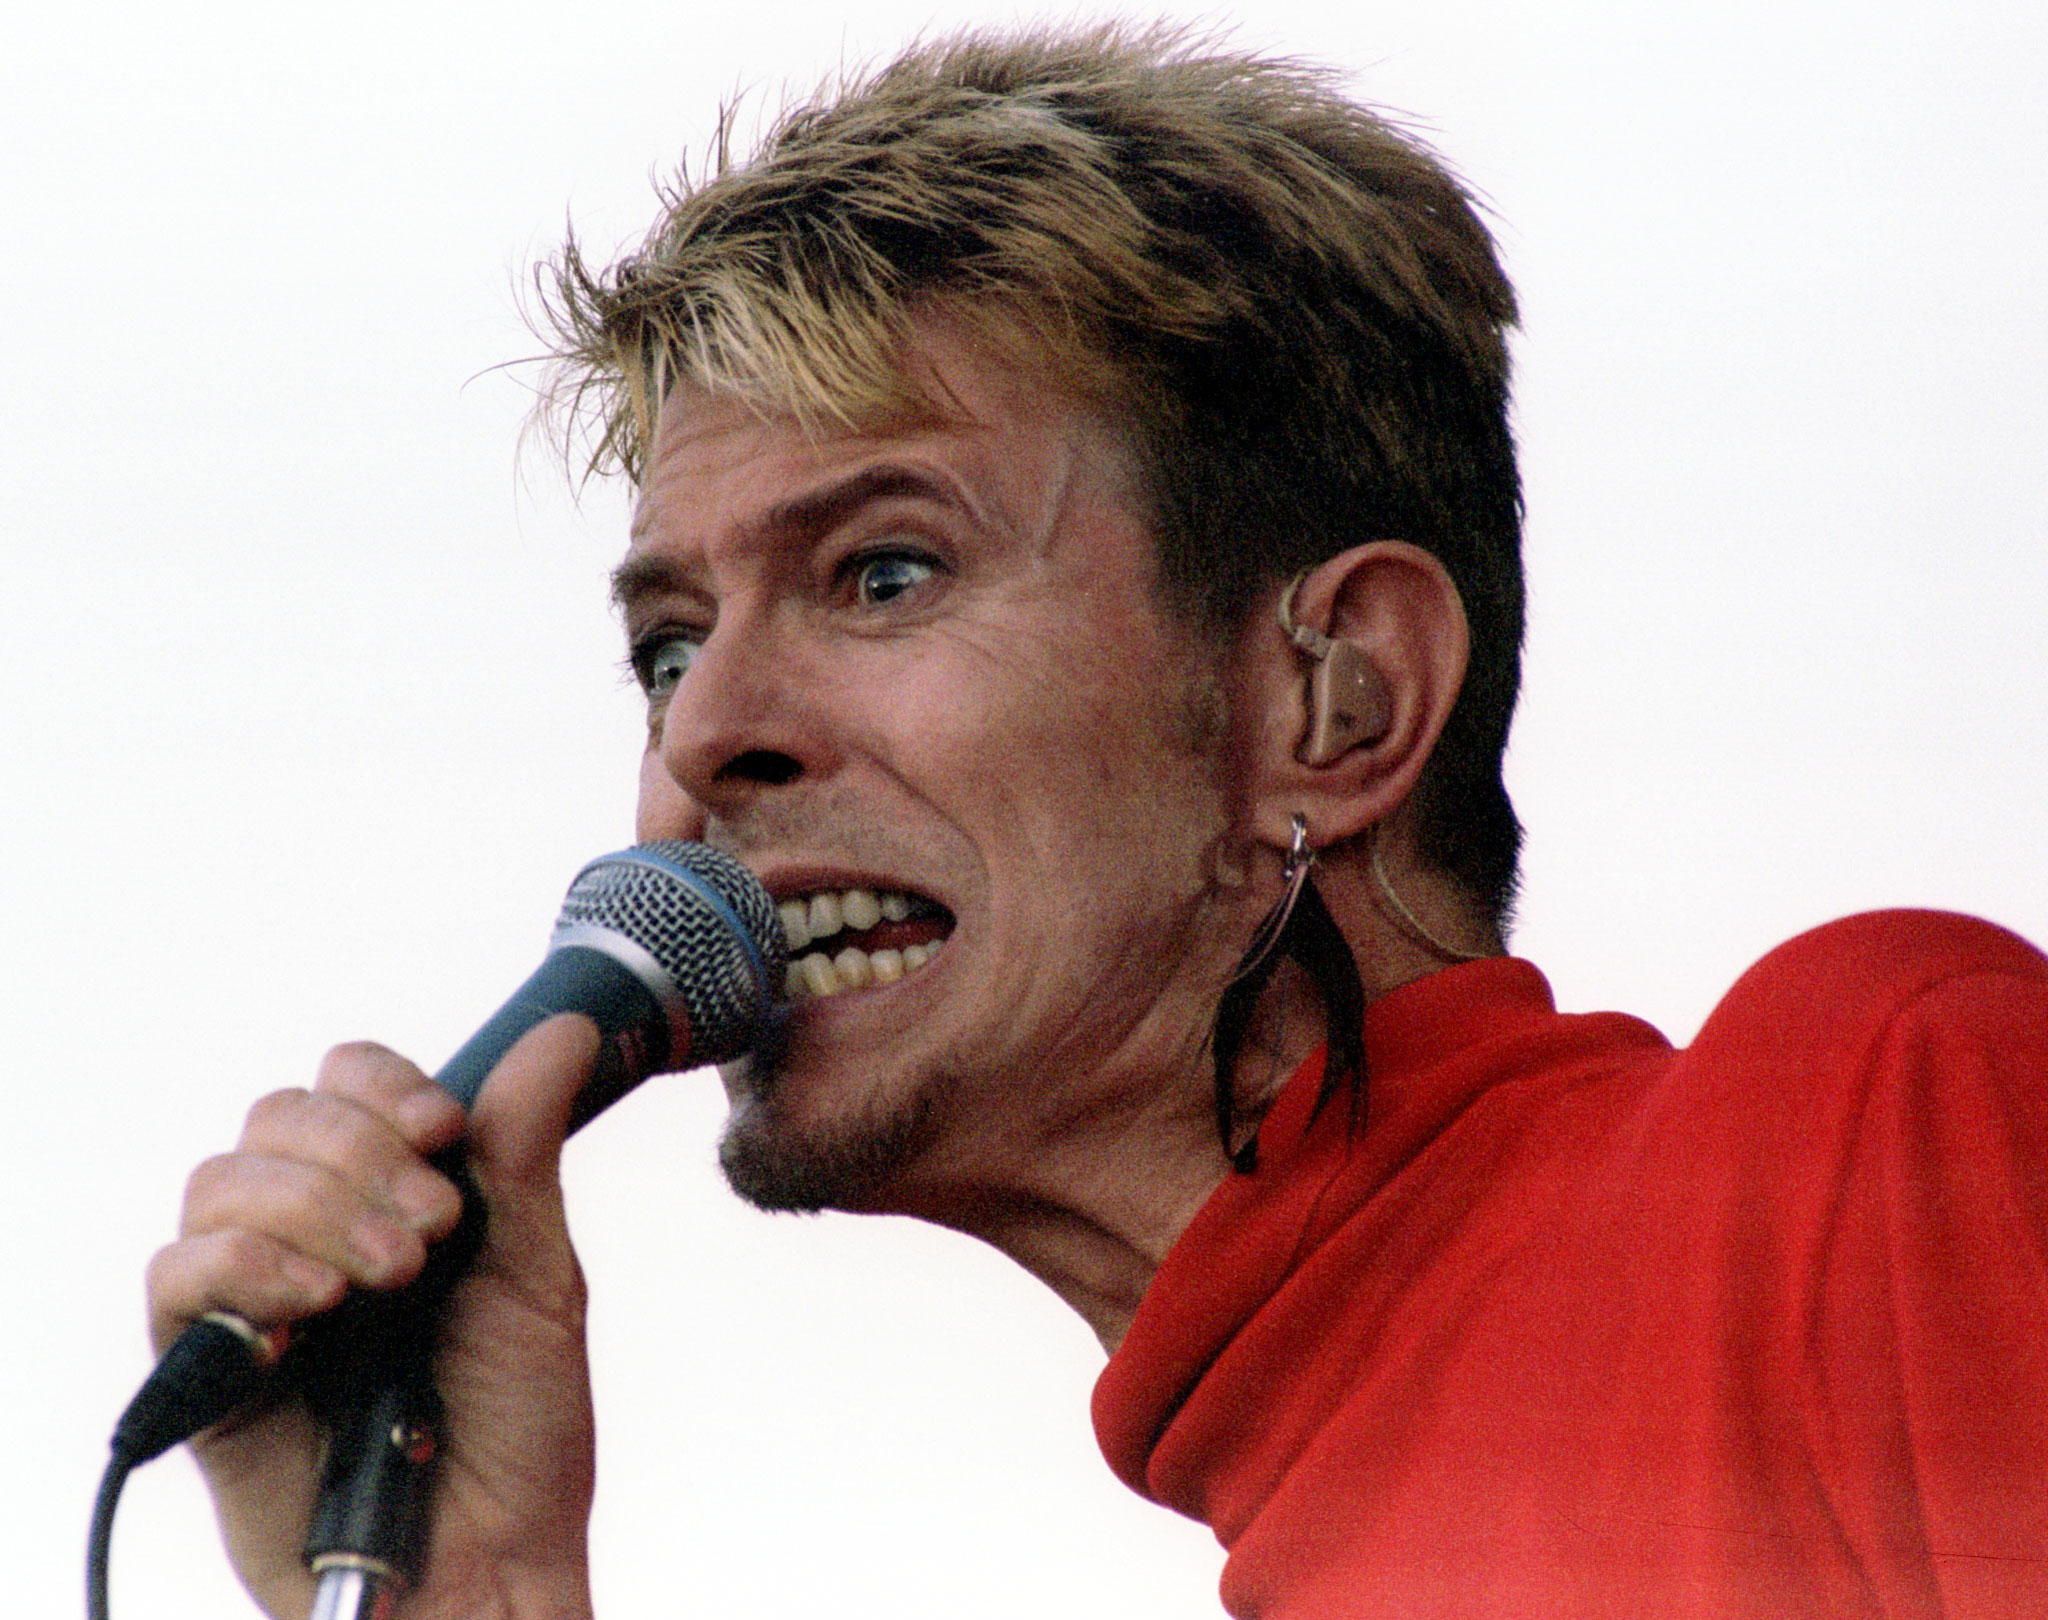 Pop singer David Bowie performs at the music festival Out In The Green in Frauenfeld